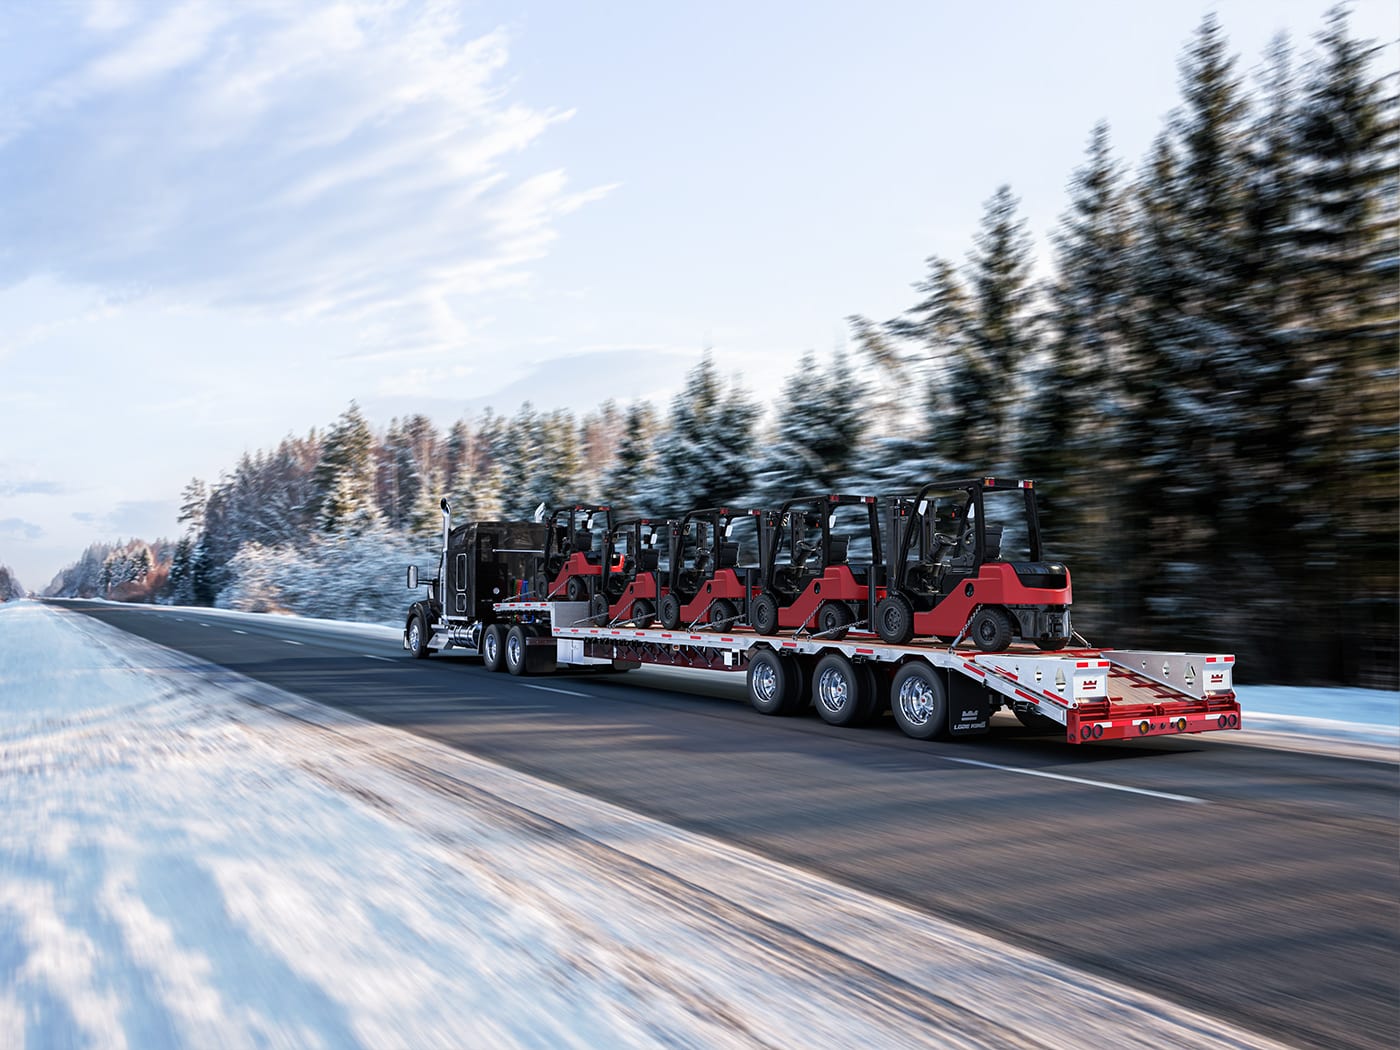 a flat bed trailer carrying fork lifts drives down the road between snow-covered trees